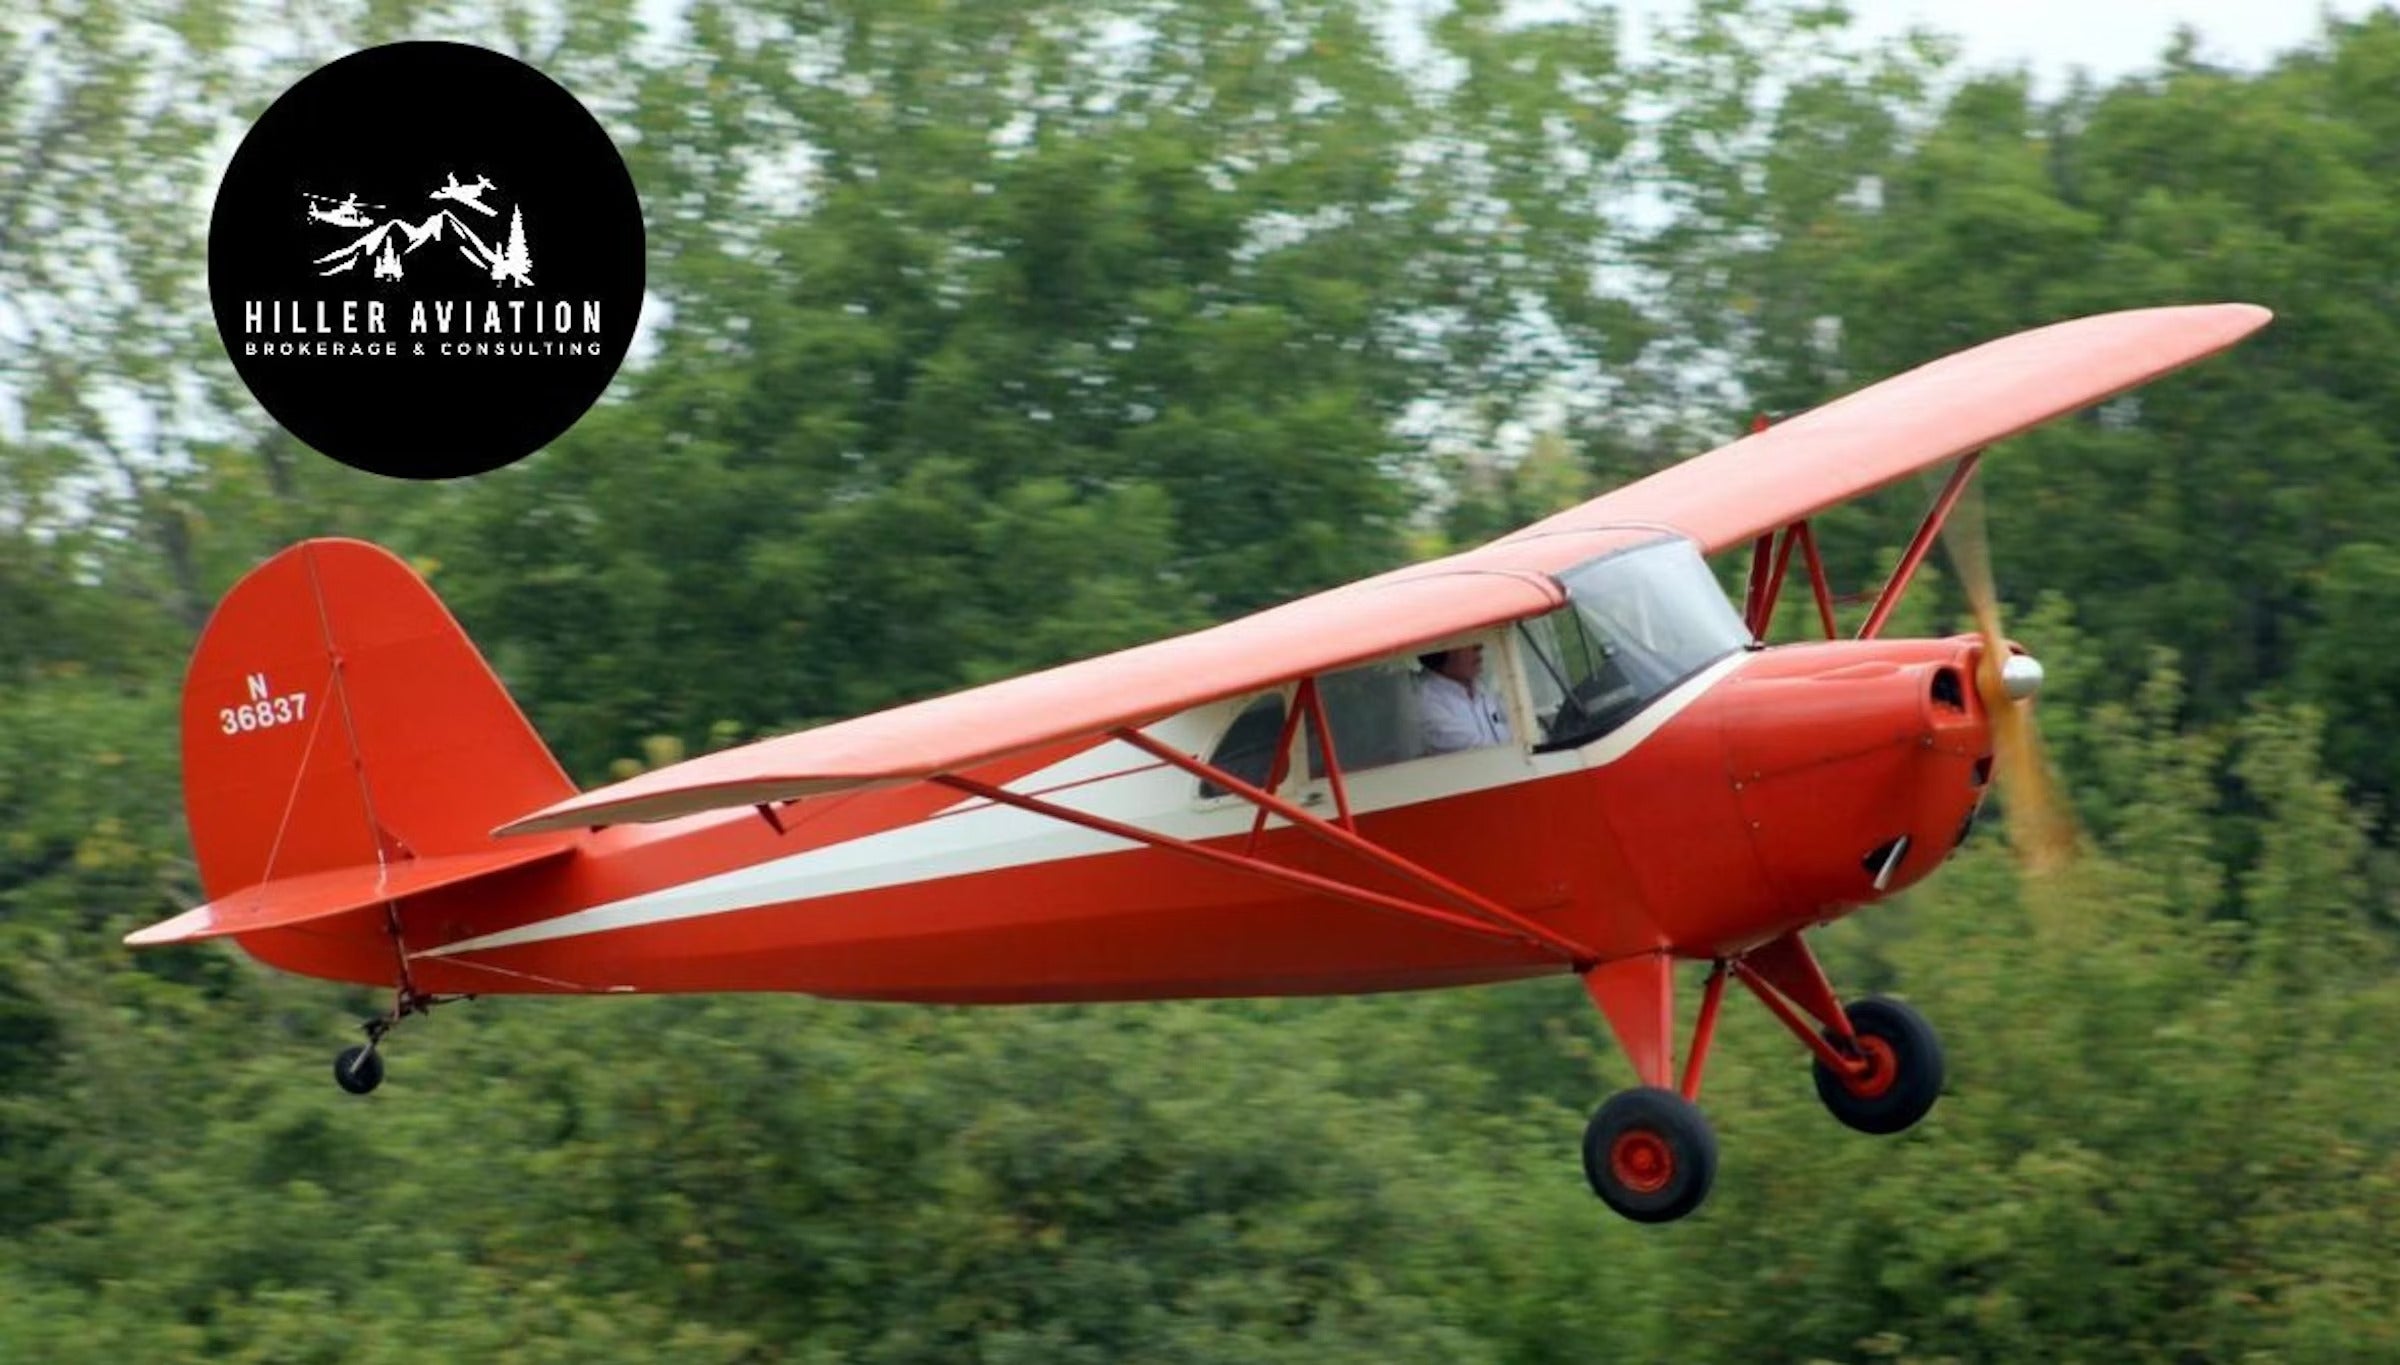 This 1941 Aeronca Super Chief Is a Time-Traveling ‘AircraftForSale’ Top Pick